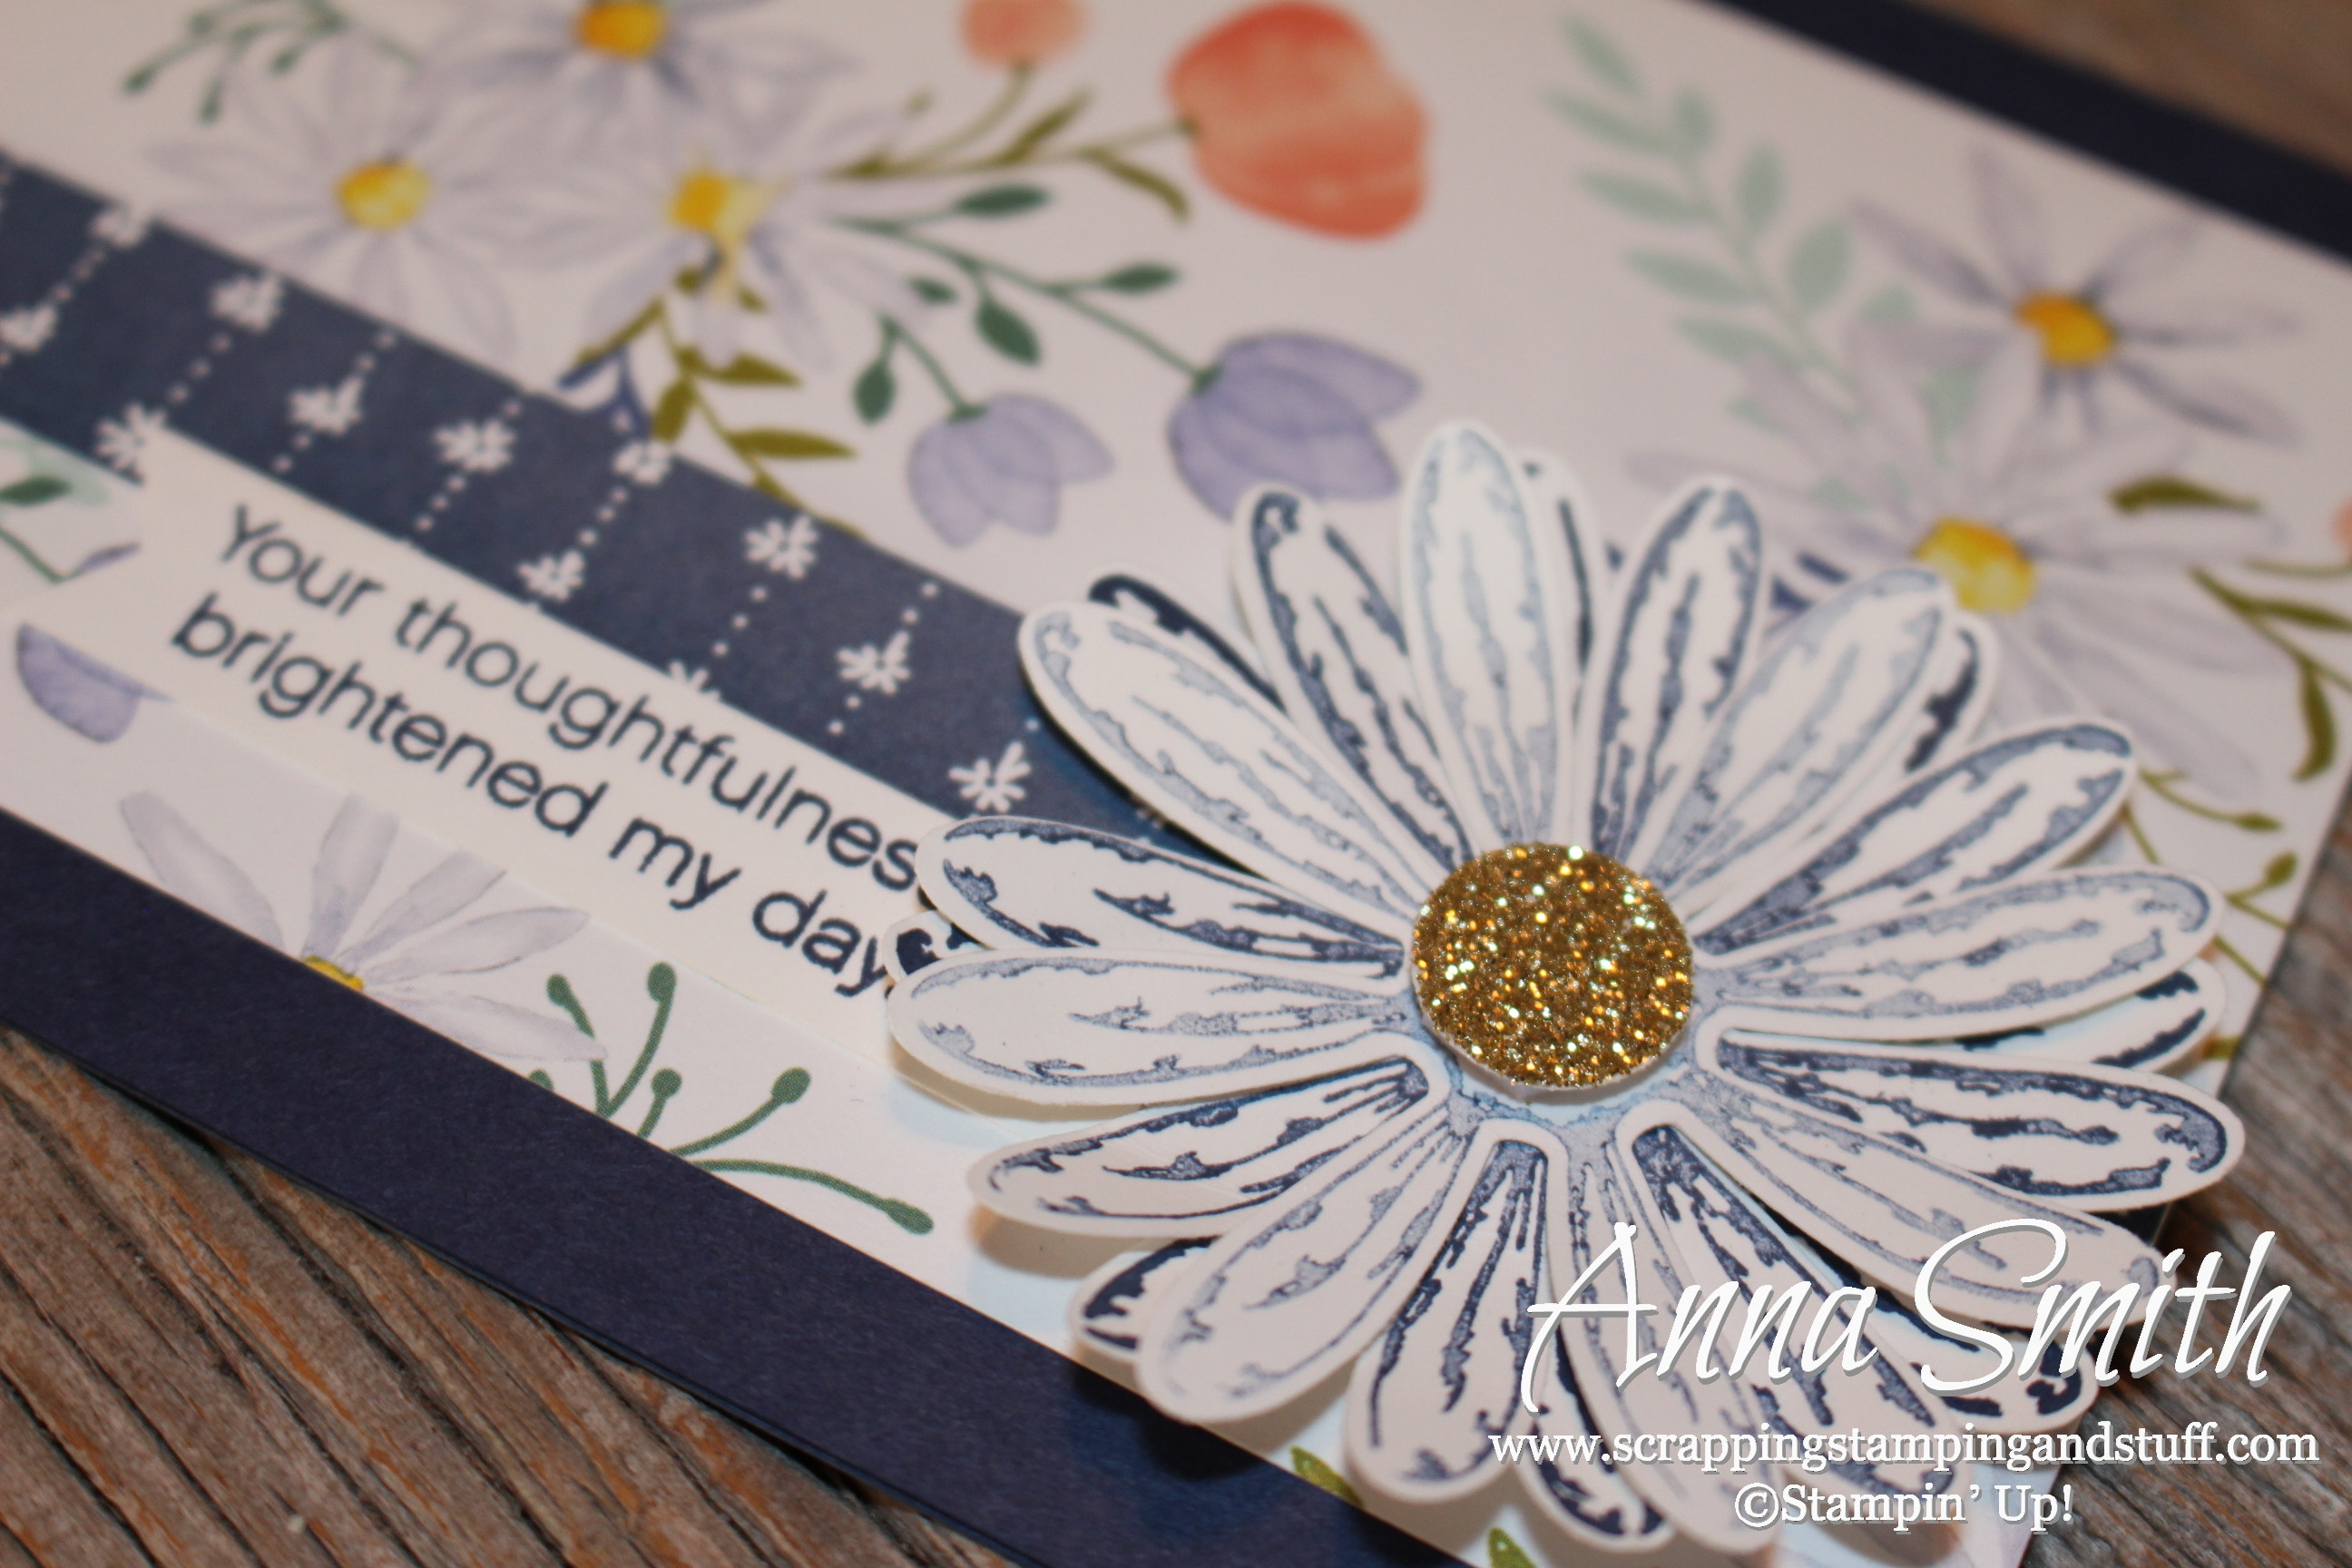 Pretty floral thank you card using Stampin' Up! Daisy Delight stamp set, daisy punch, and delightful daisy designer paper.